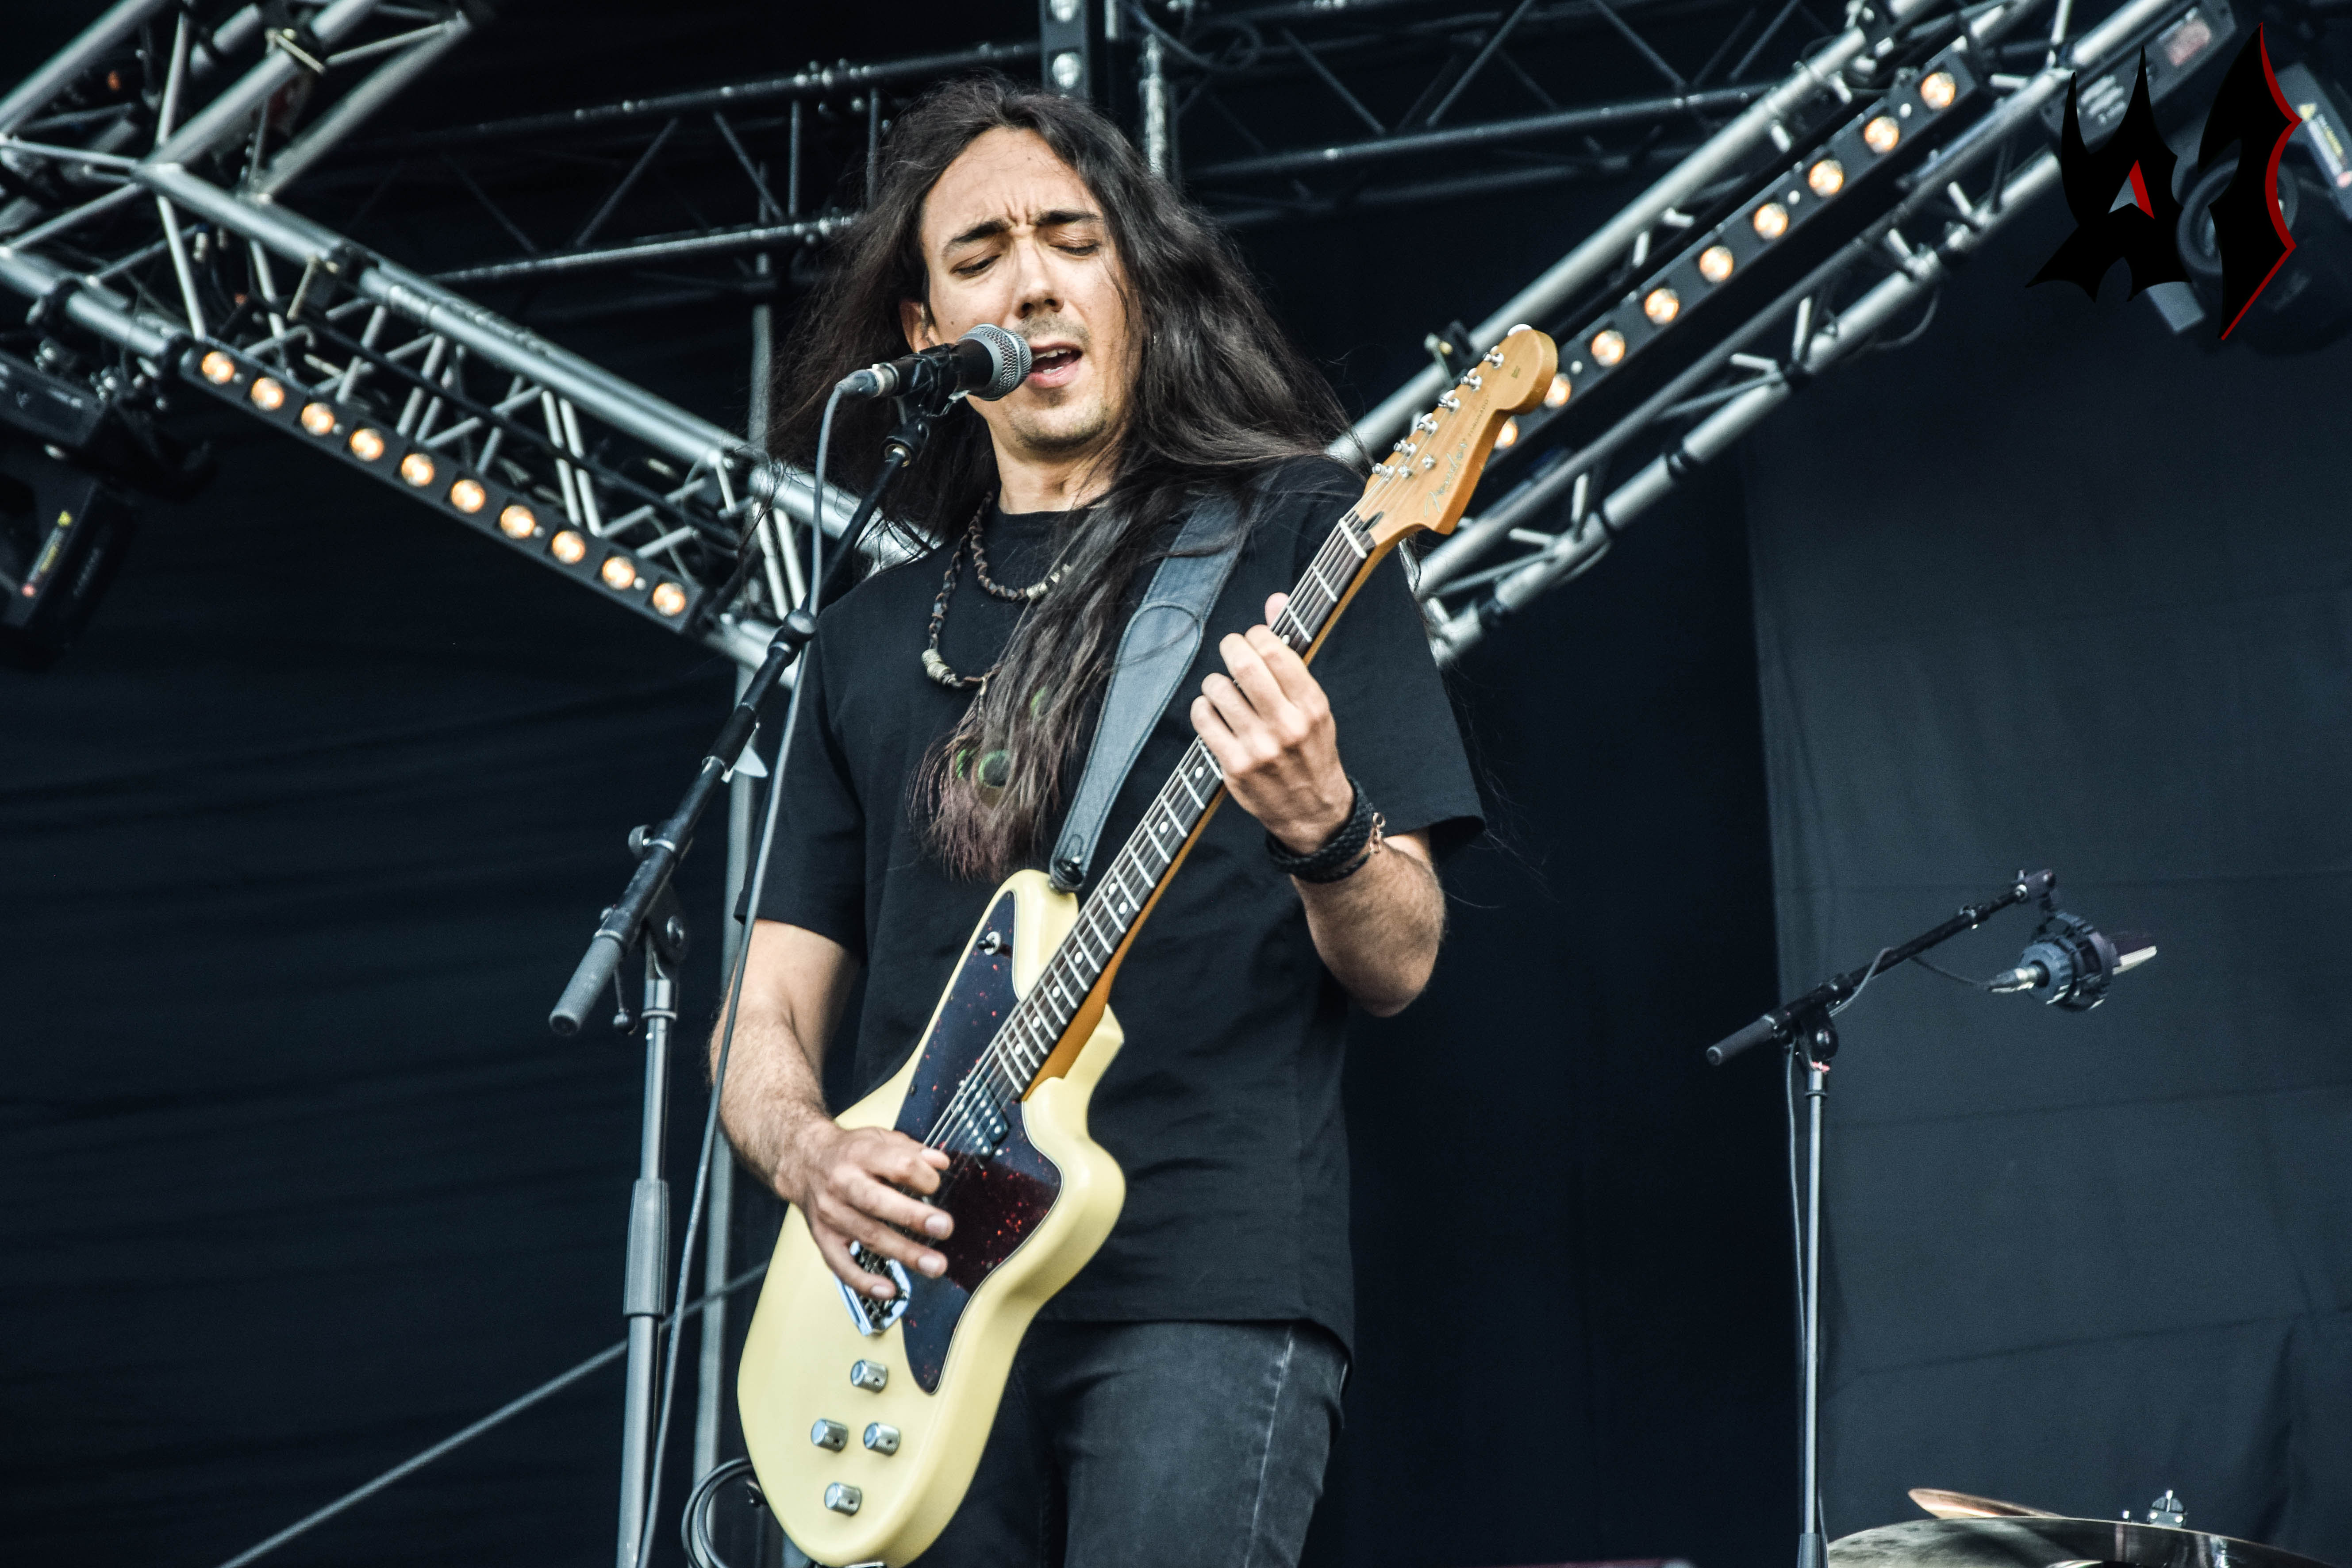 Donwload 2018 – Day 2 - Alcest 7